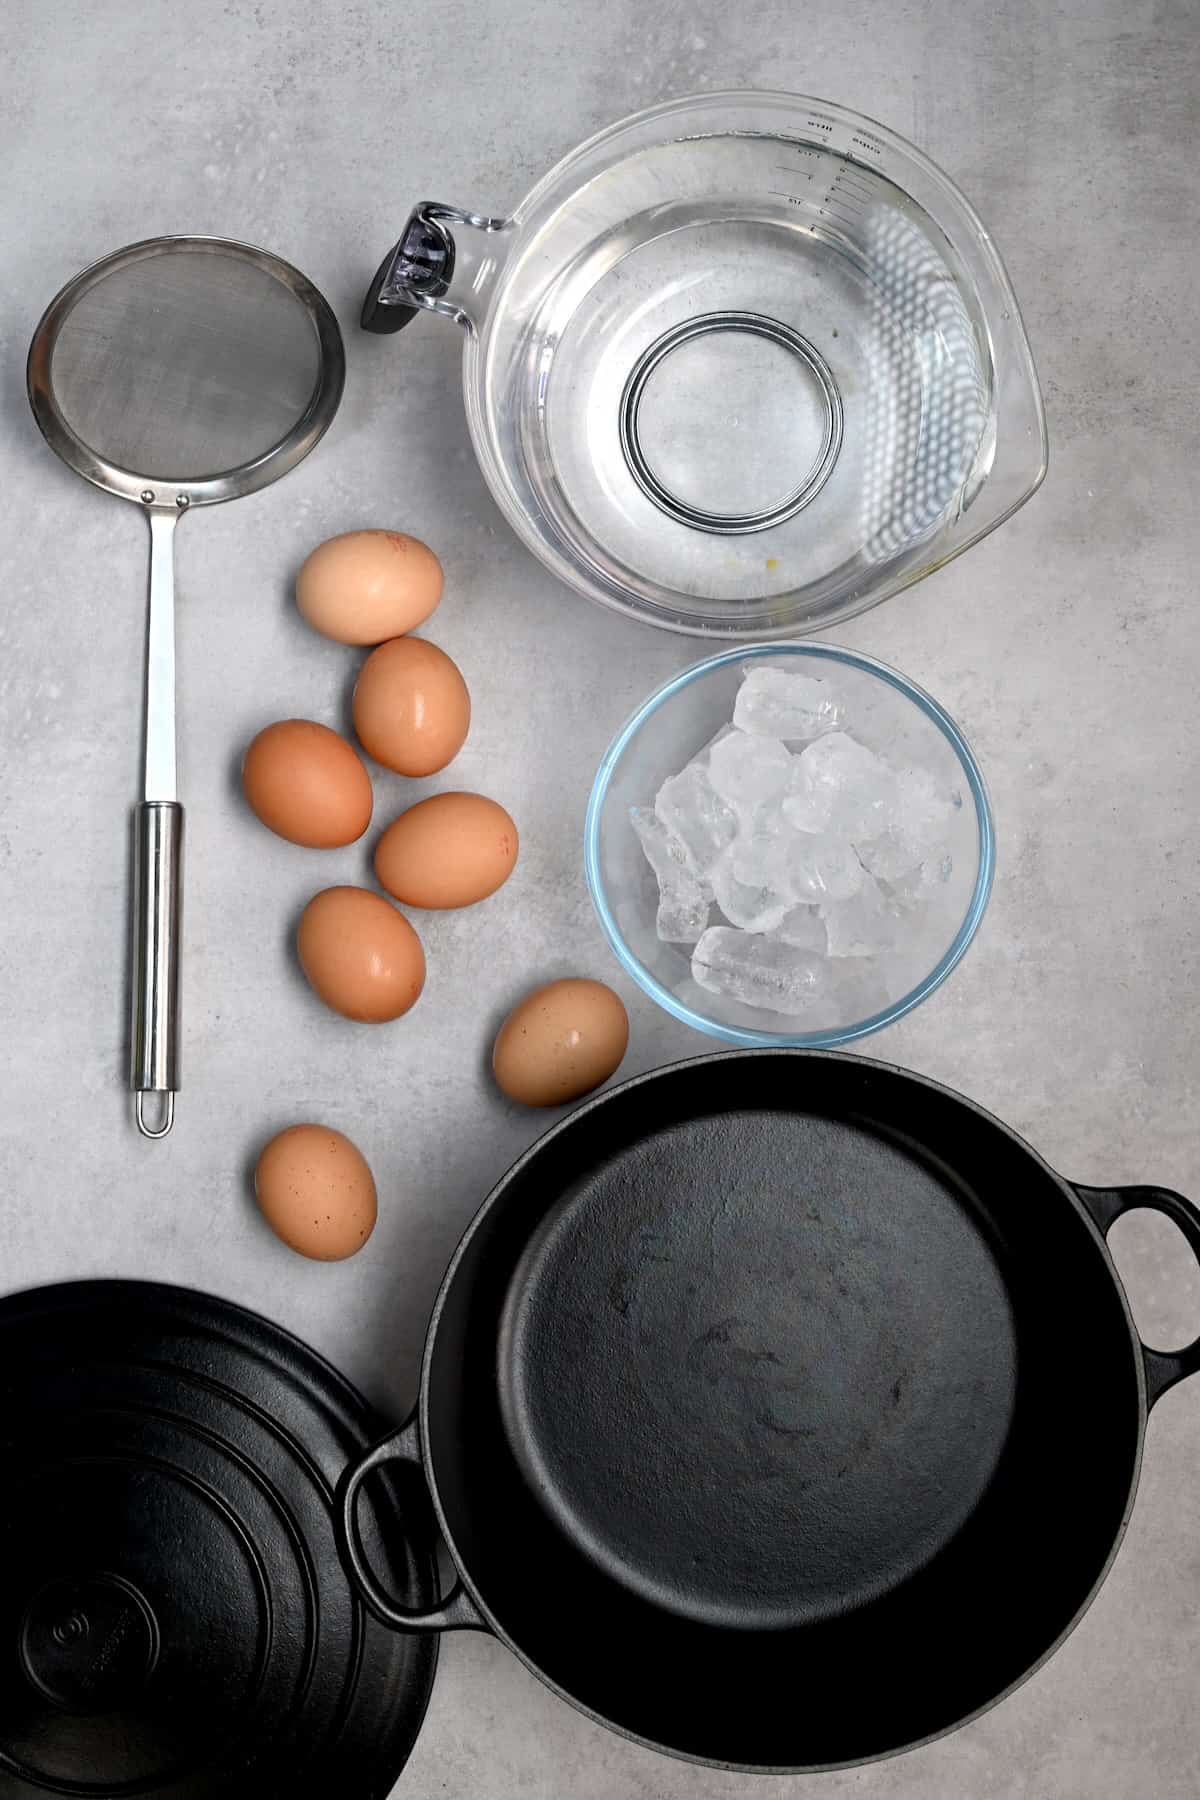 Eggs and tools used to boil them